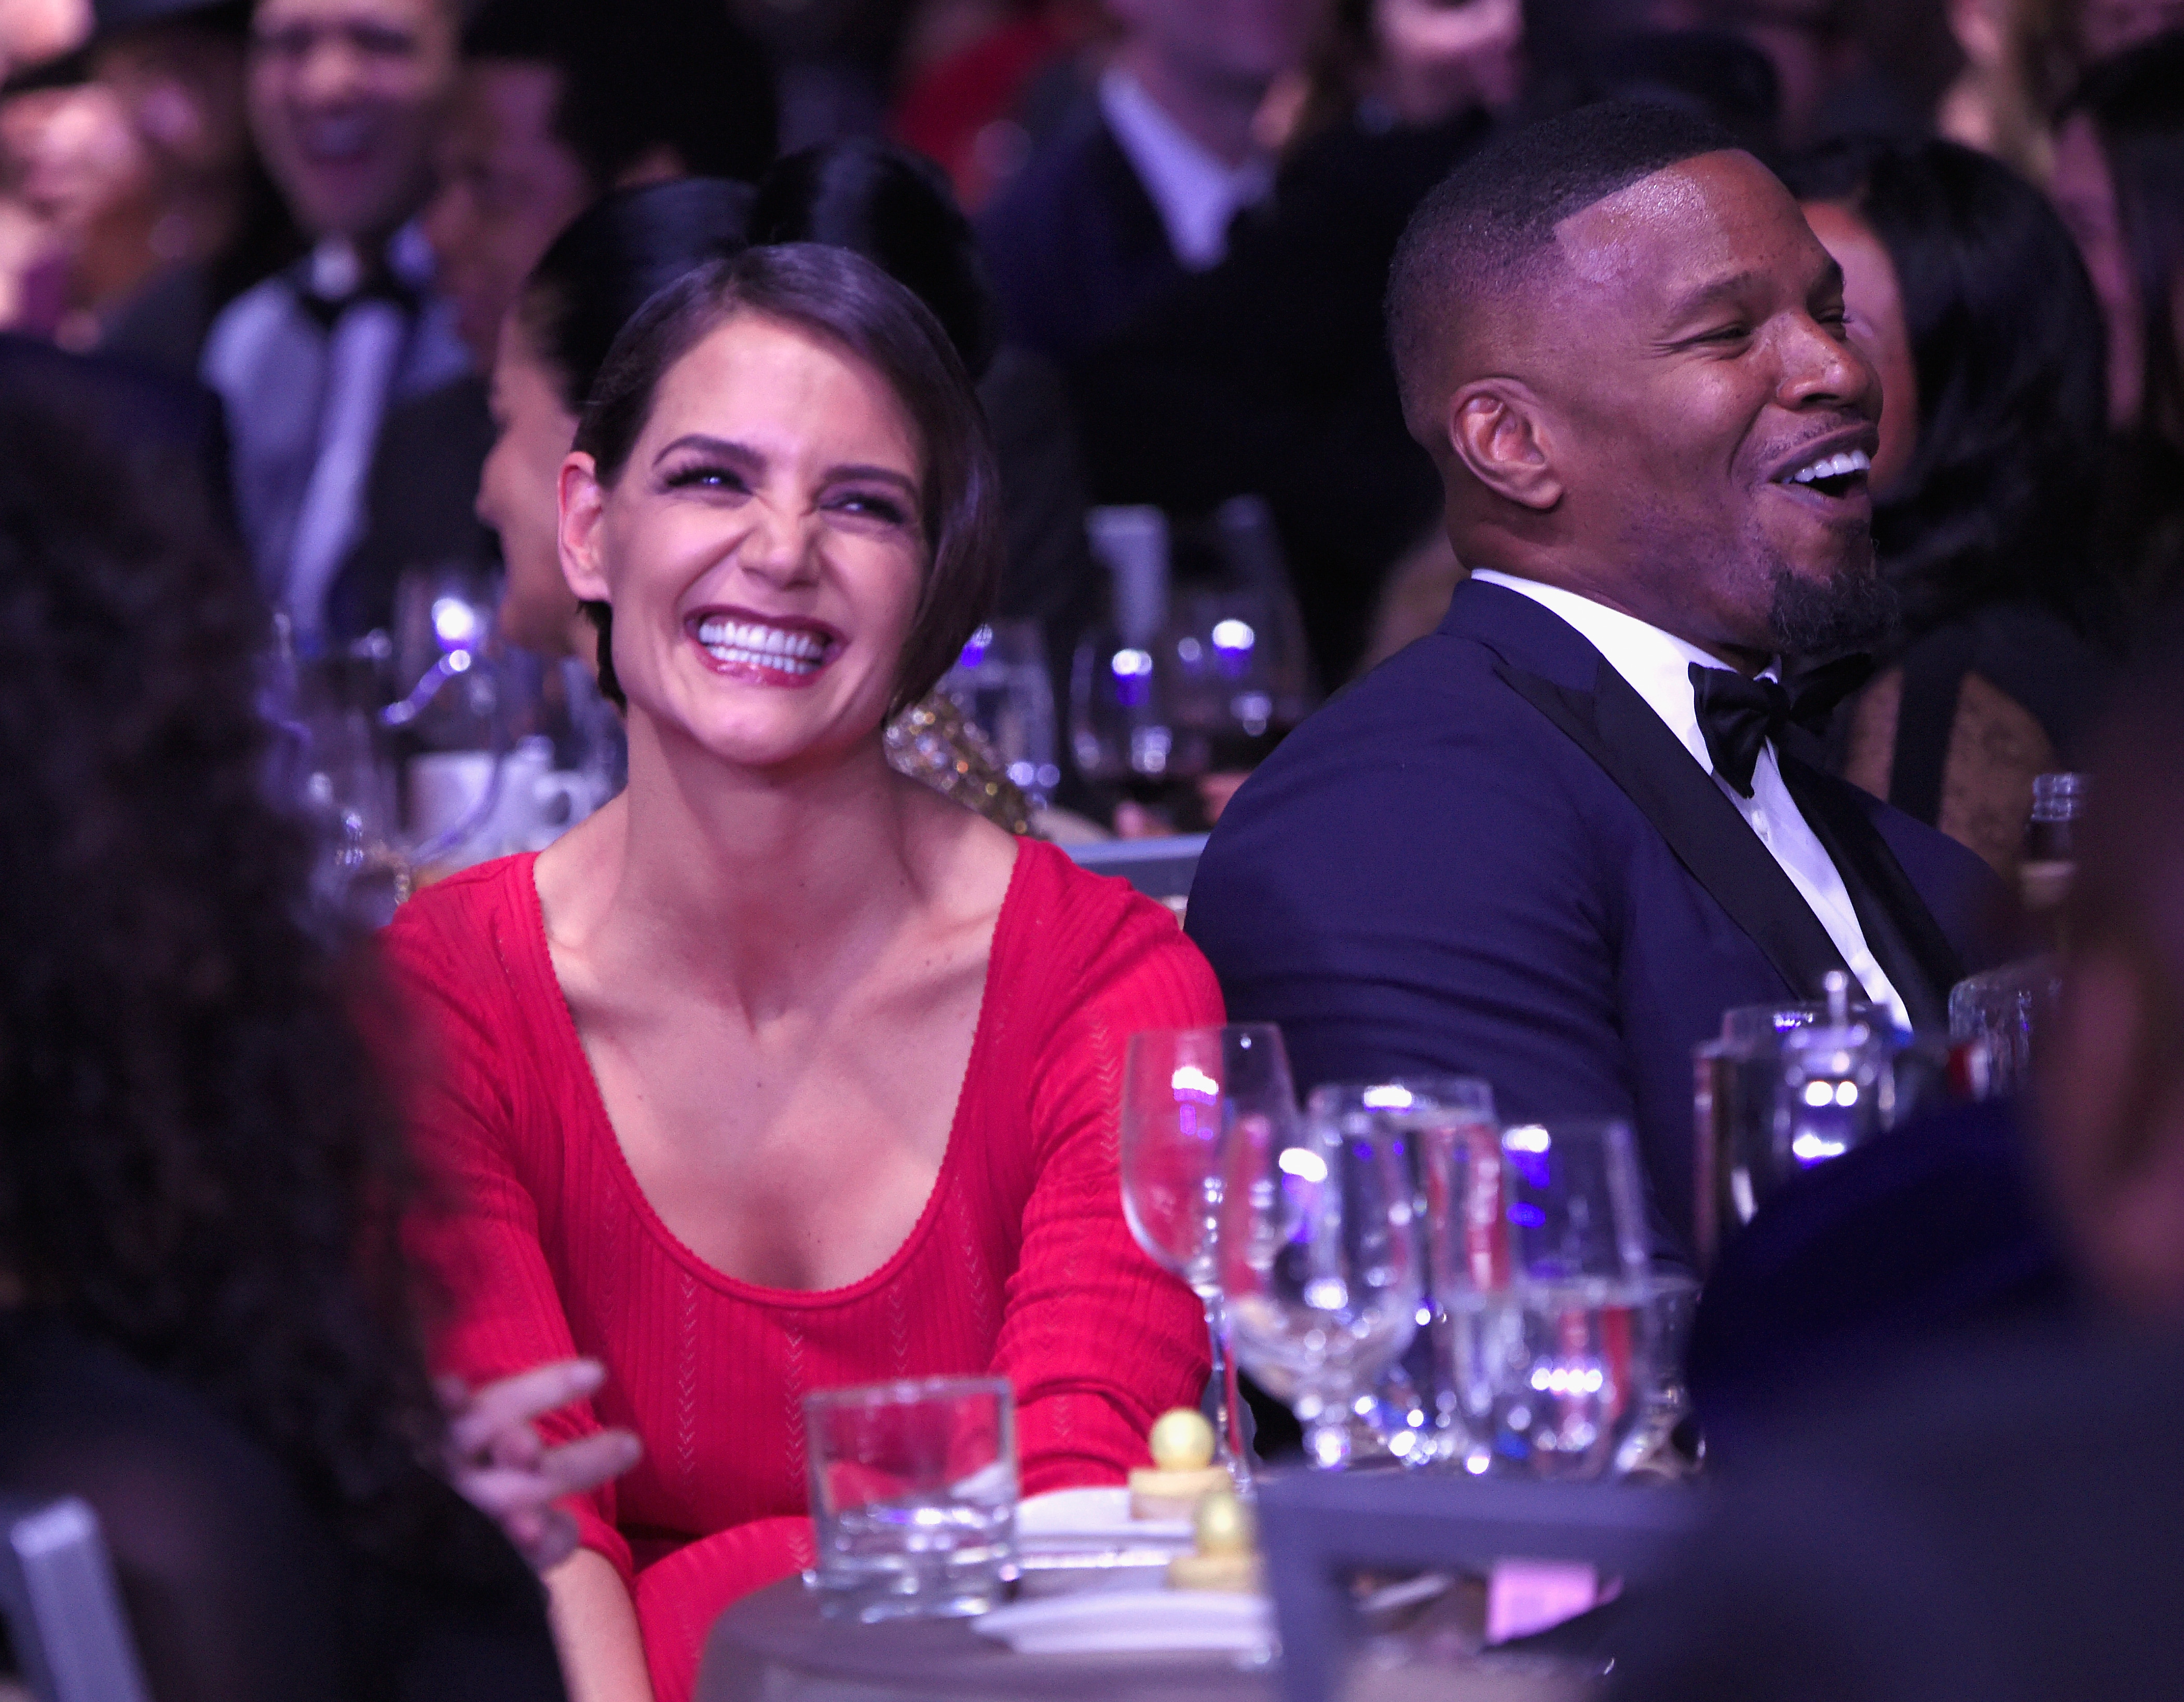 Katie Holmes and Jamie Foxx at the Clive Davis and Recording Academy Pre-Grammy Gala in New York City, 2018 | Source: Getty Images